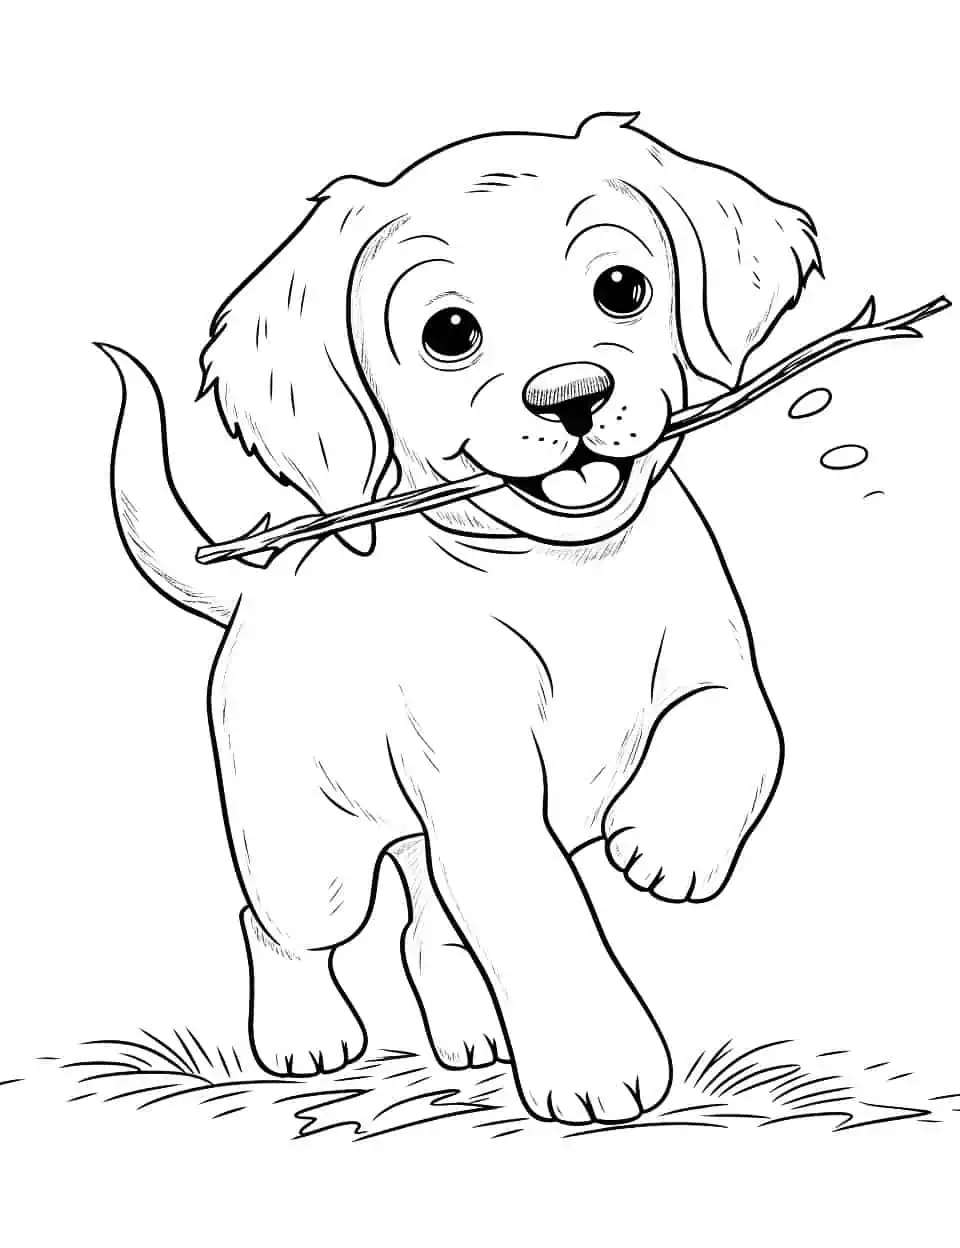 Golden Retriever Fetch Coloring Page - A Golden Retriever happily fetching a stick.